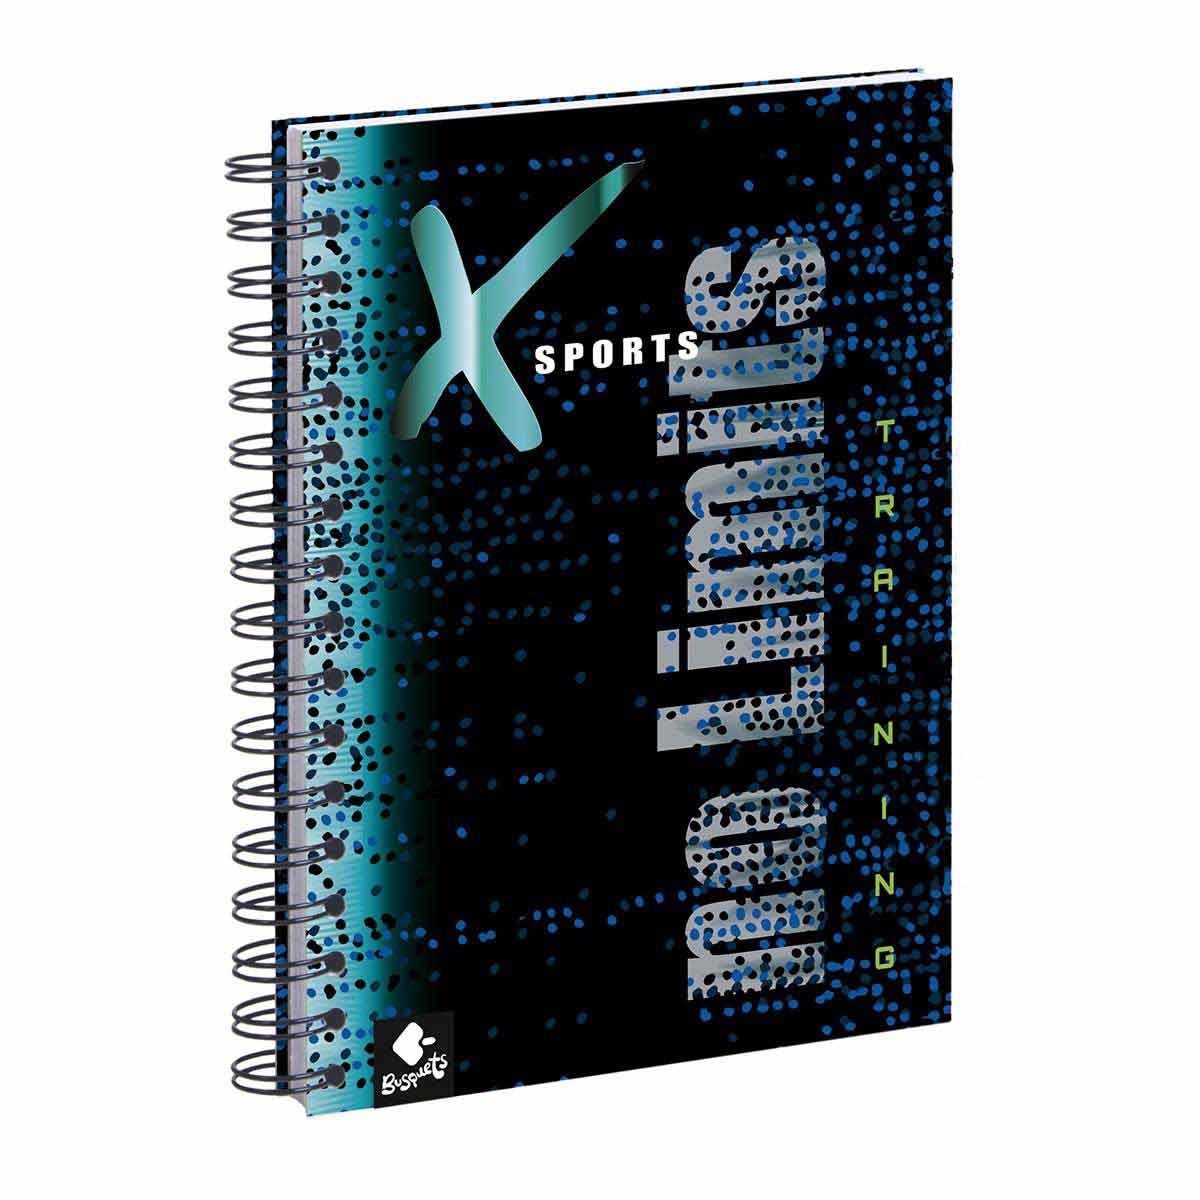 XSPORTS NOTE BOOK WIRO GRIDDED SMALL SQUARES 16X22CM 120 SHEETS